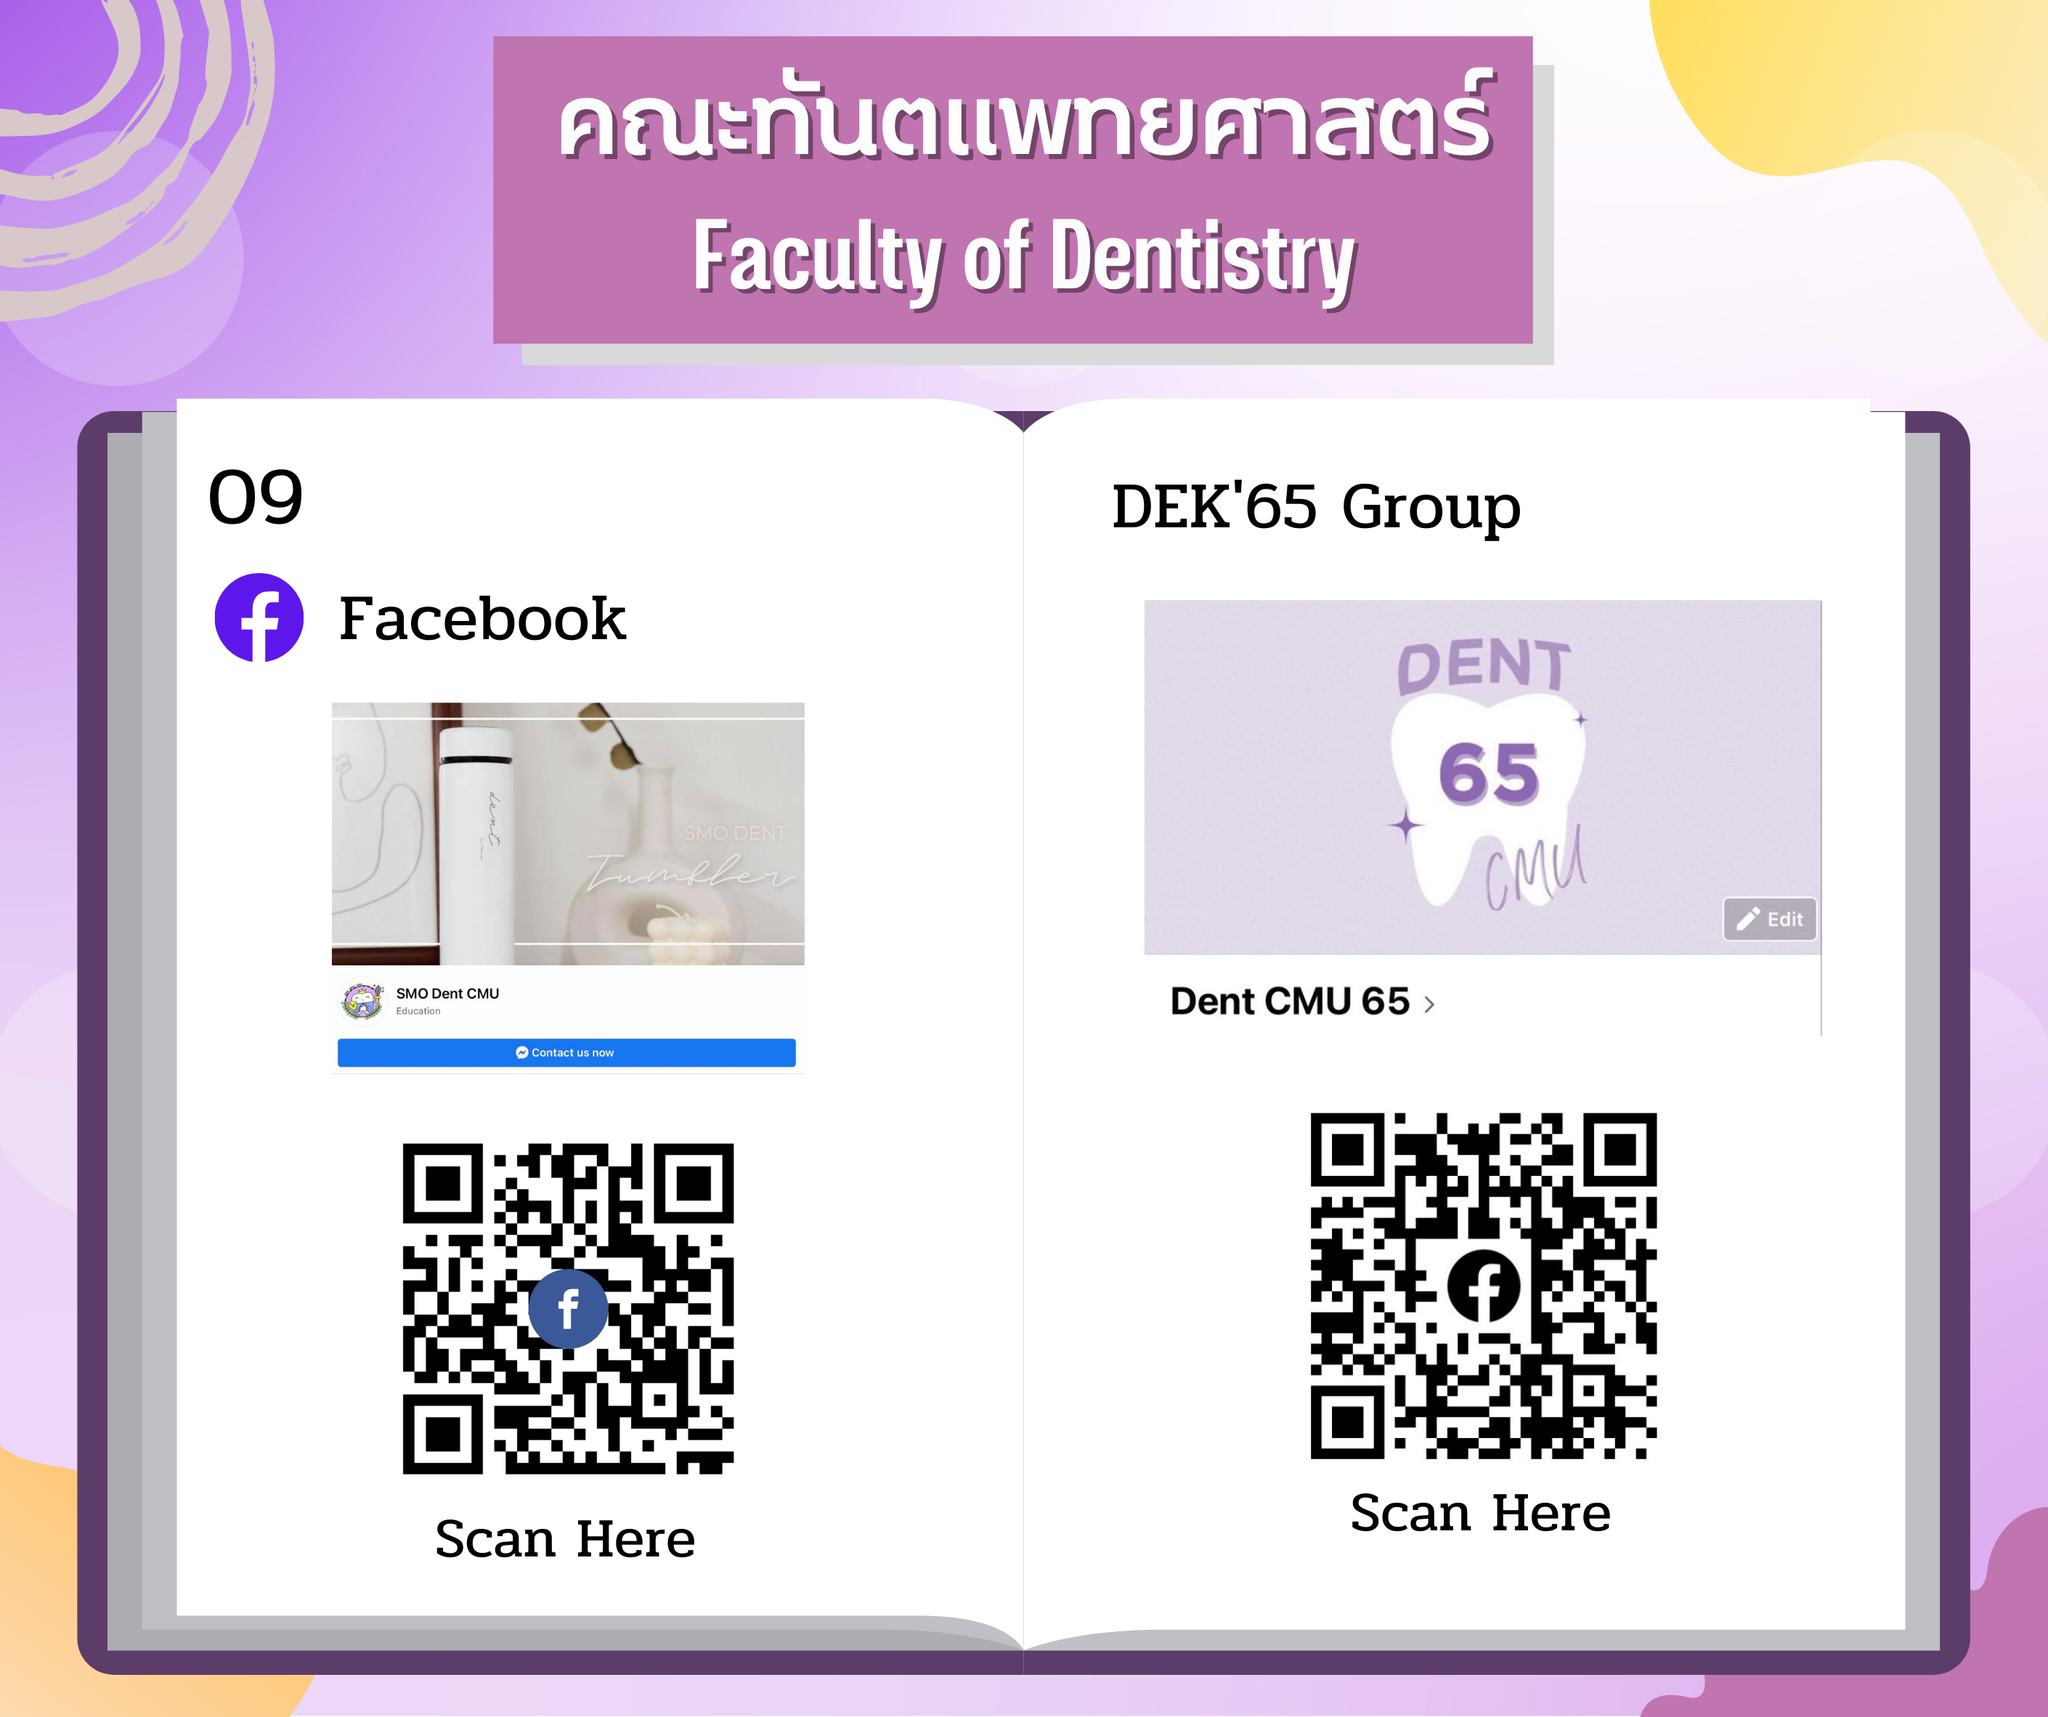 Student Union of Faculty of Dentistry